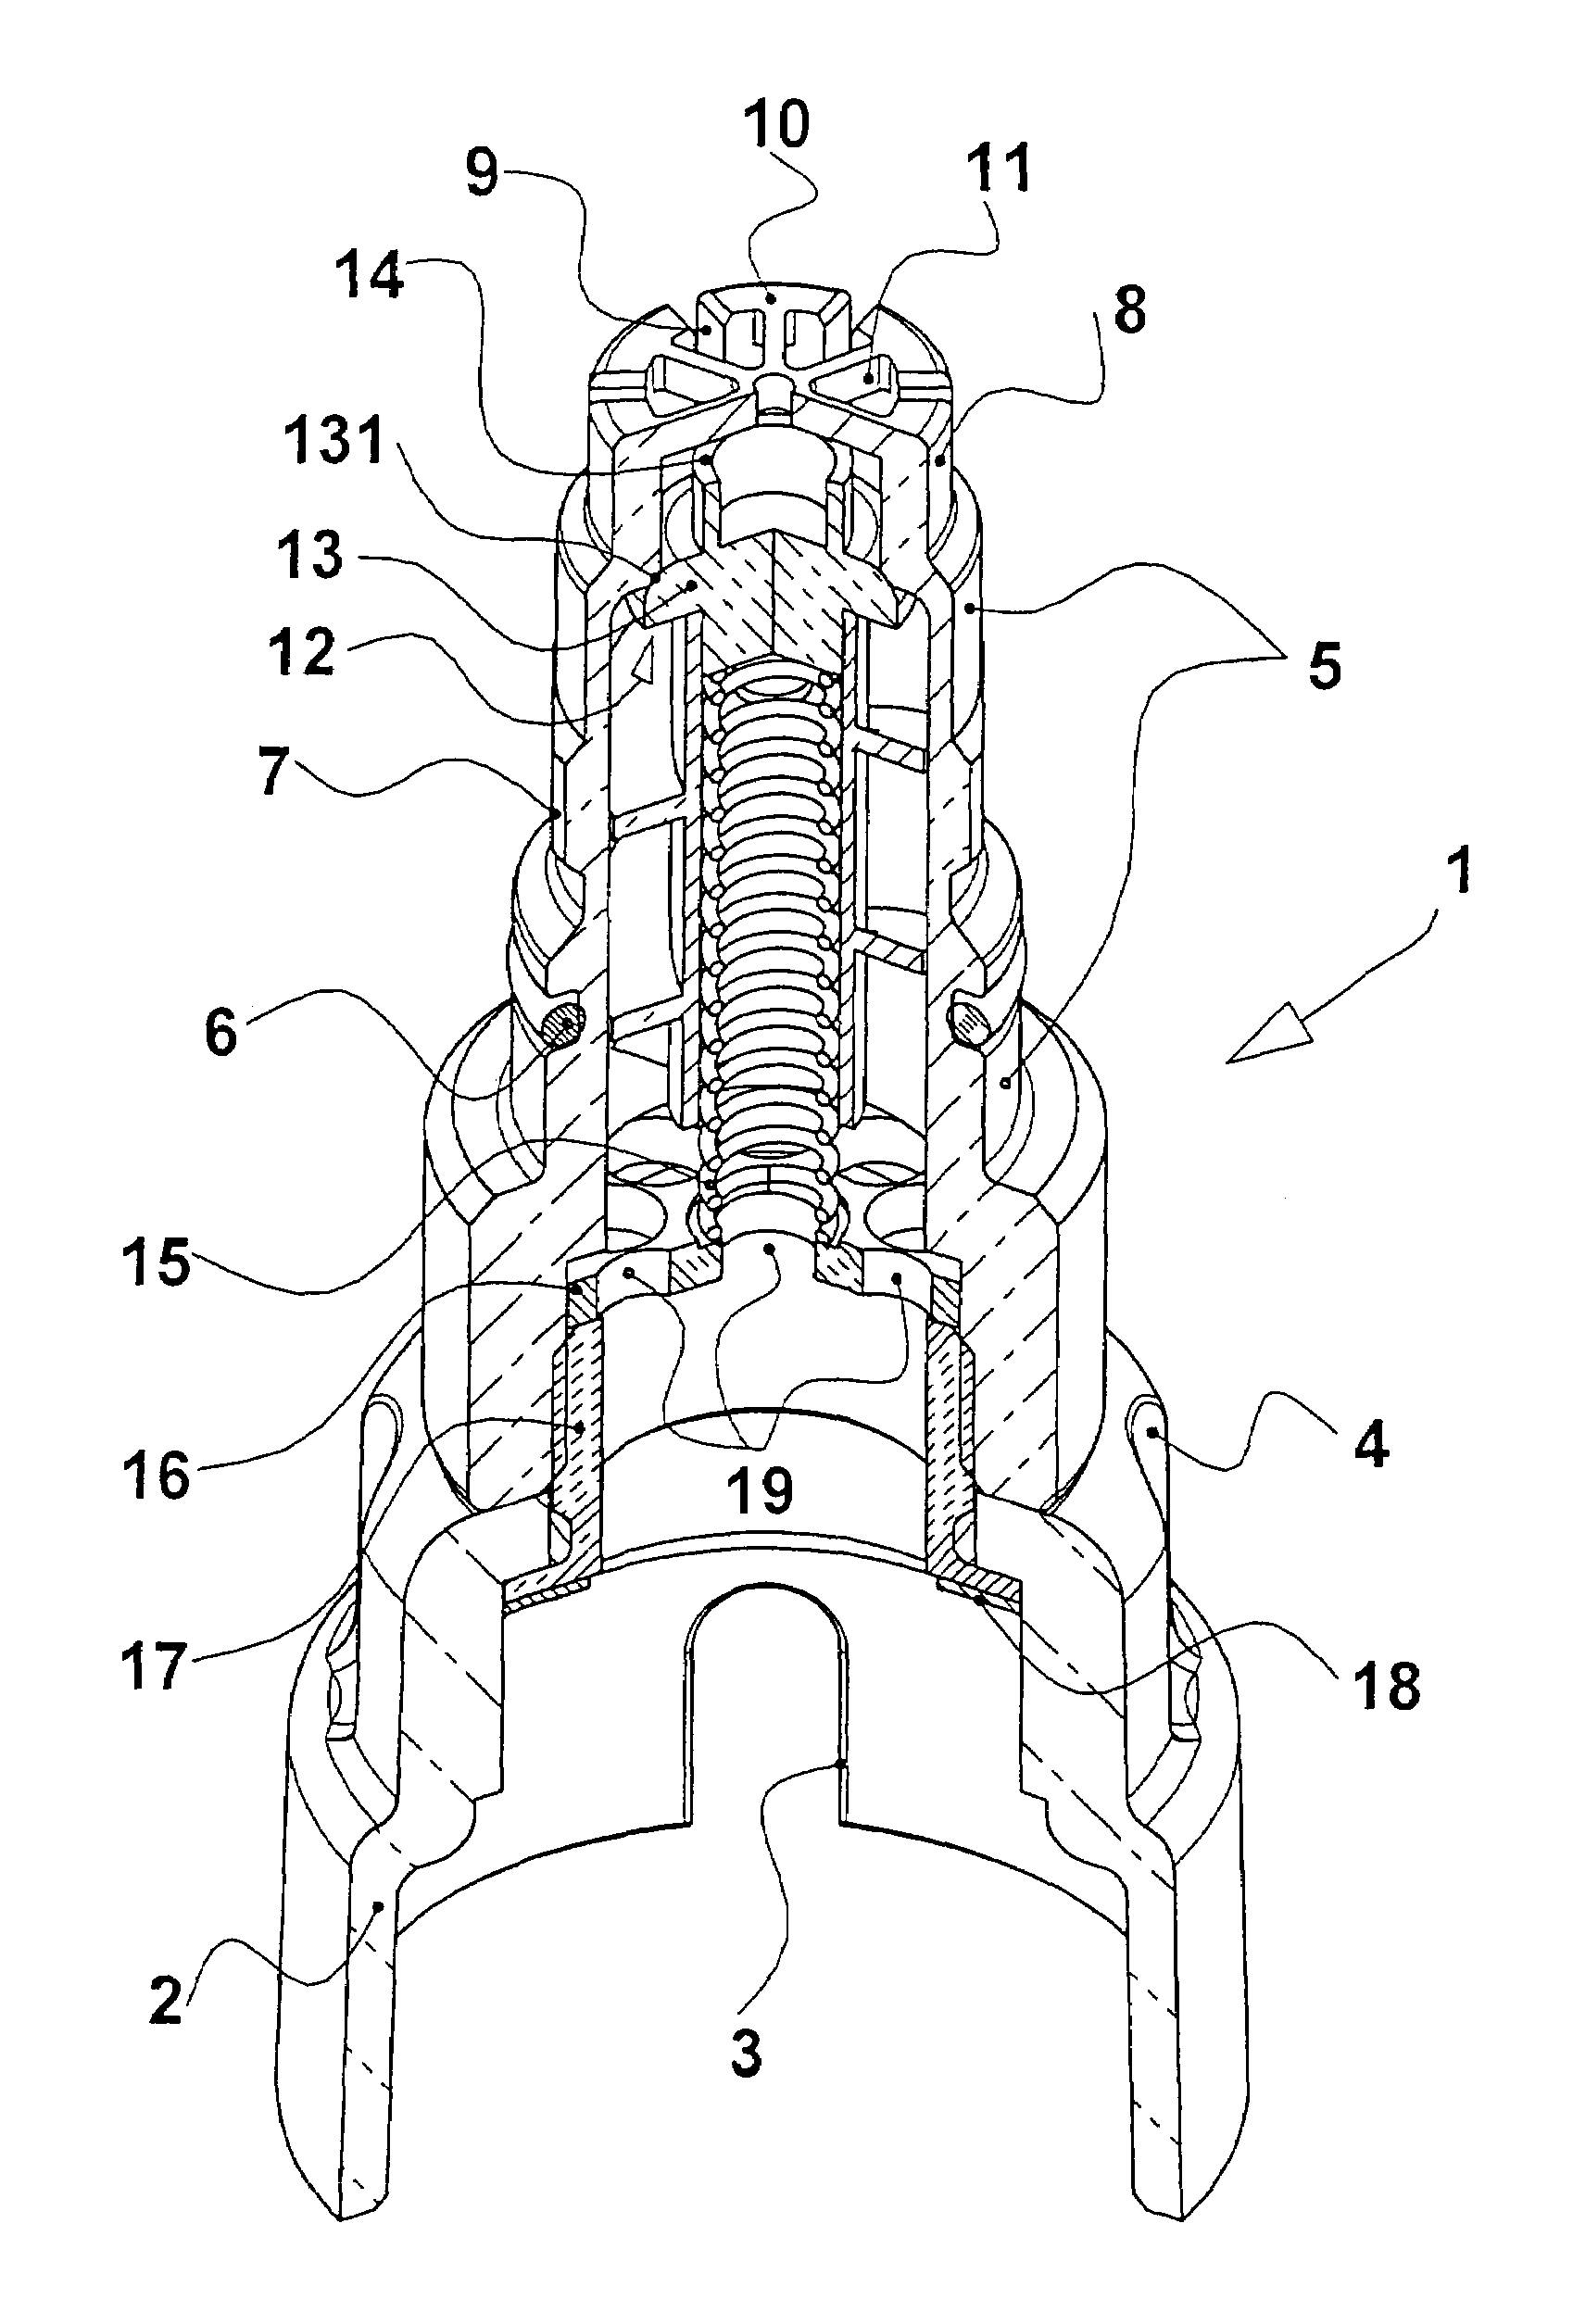 Filling system for an anesthetic evaporator